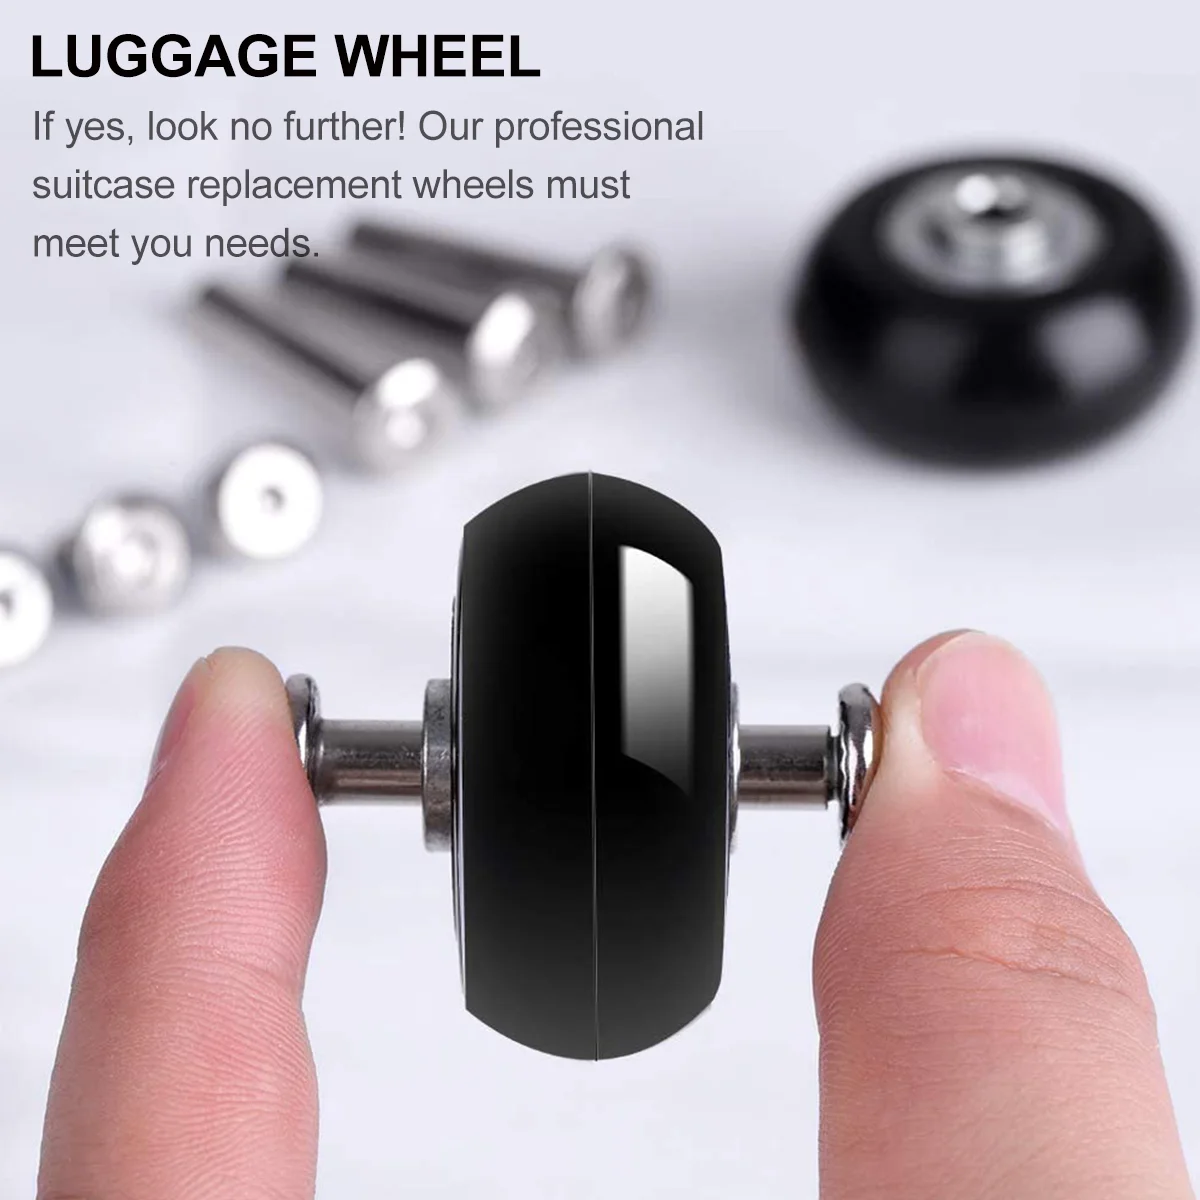 

30 Pcs Trolley Case Casters Mute Luggage Wheels Travel Bags Repair Rubber Suitcase Replacement Wear-Resistant